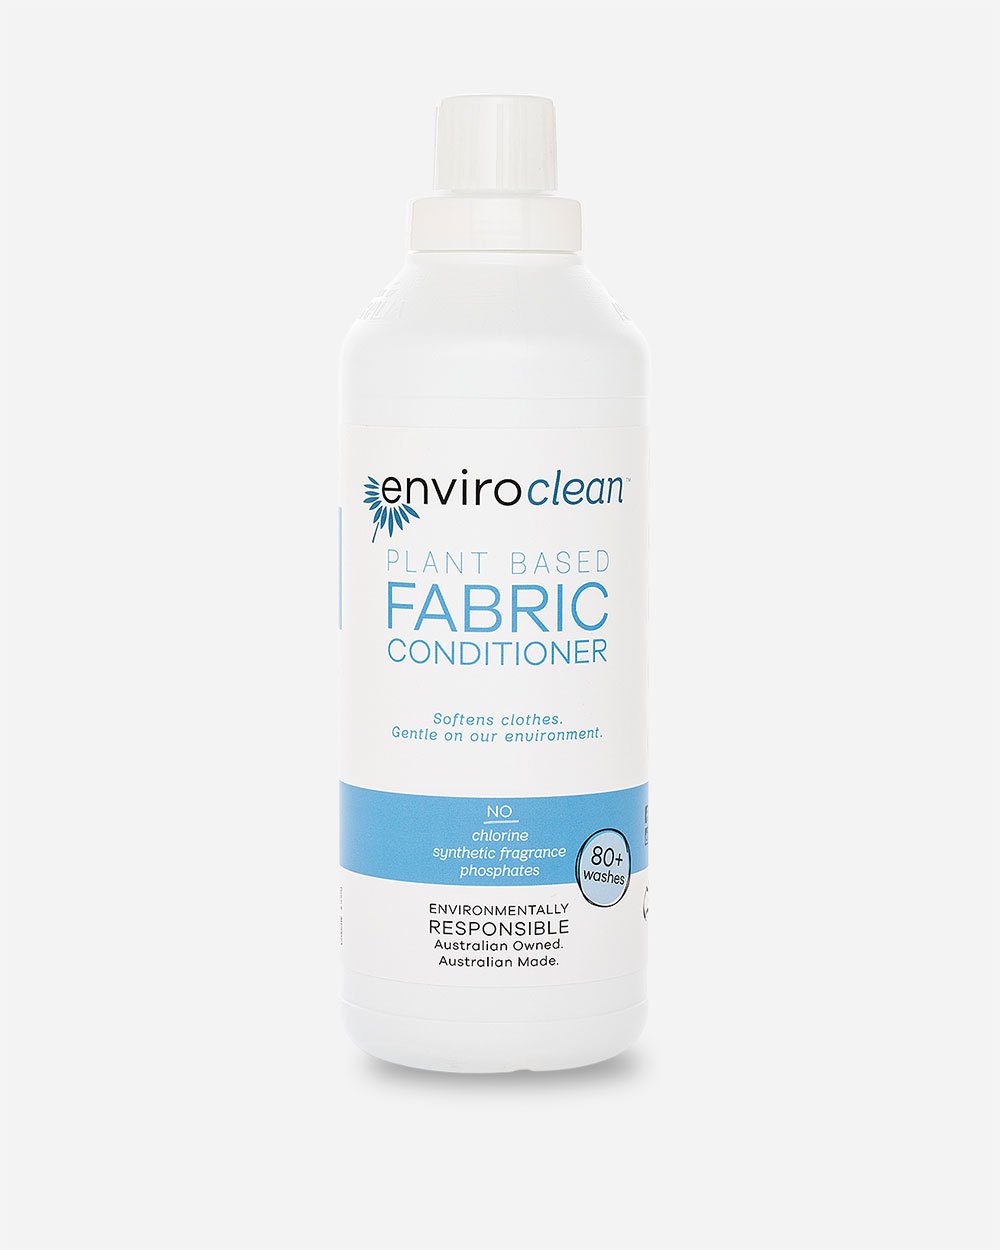 Fabric Conditioner from Enviroclean